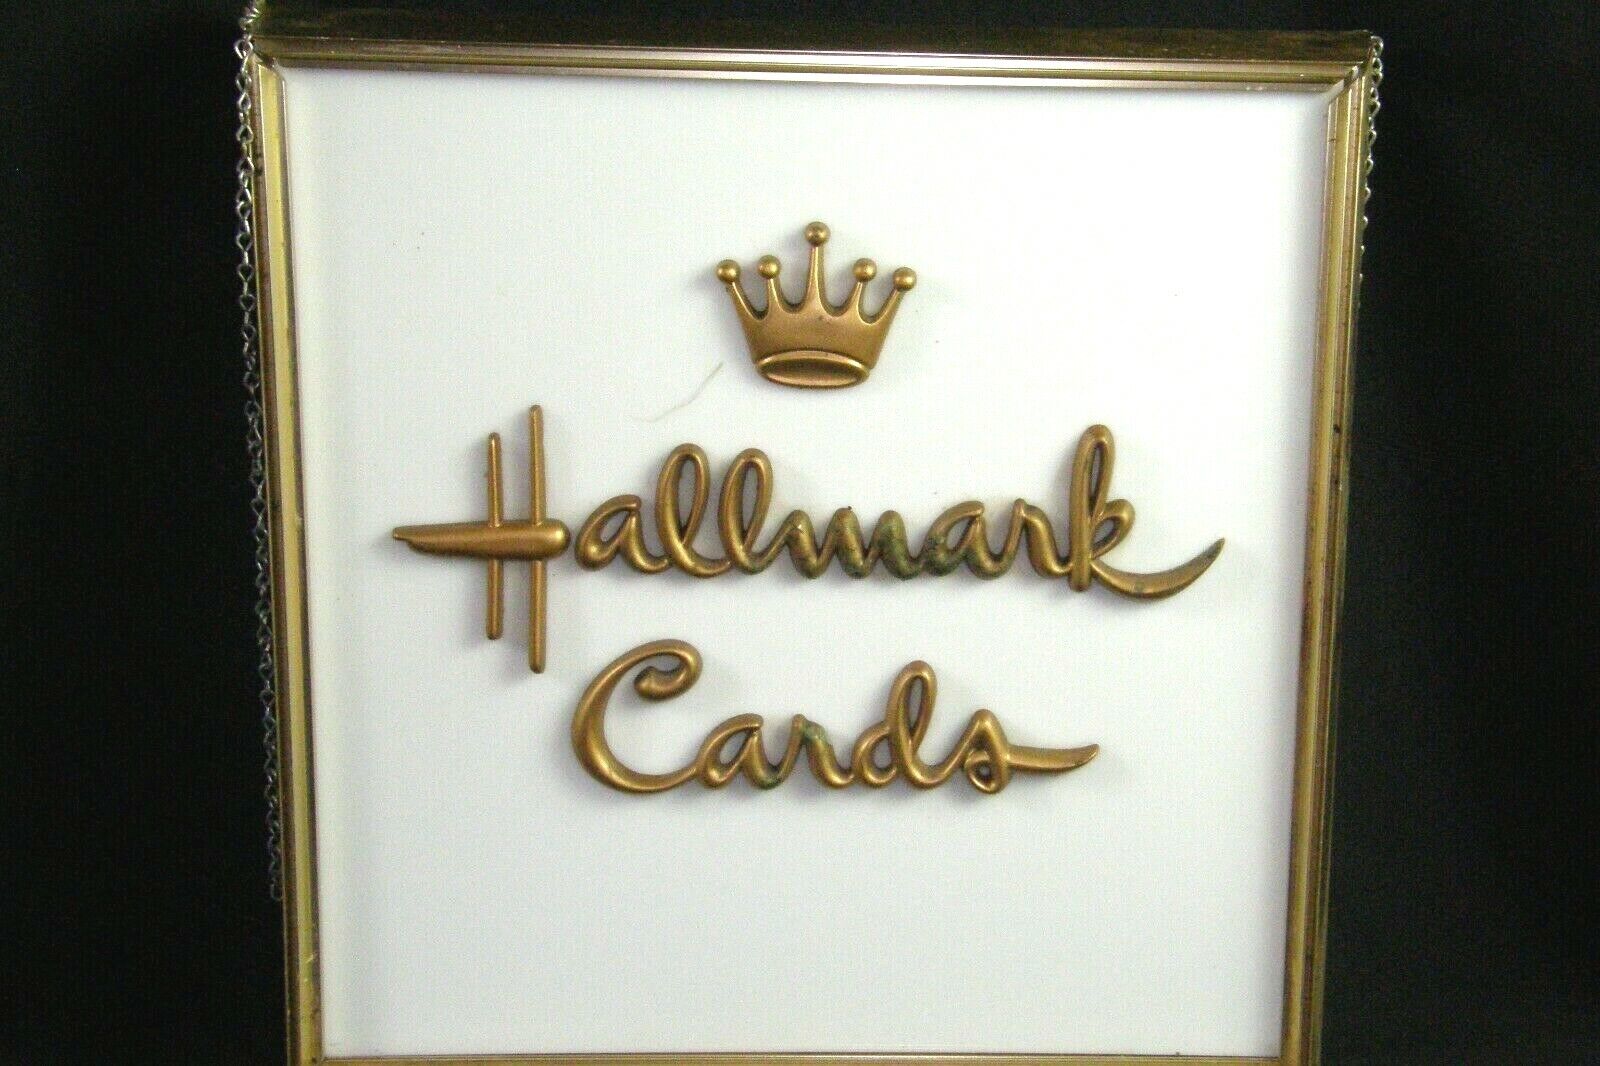 HALLMARK CARDS GOLD CROWN DEALER STORE DISPLAY ADVERTSING LIGHTED HANGING SIGN 